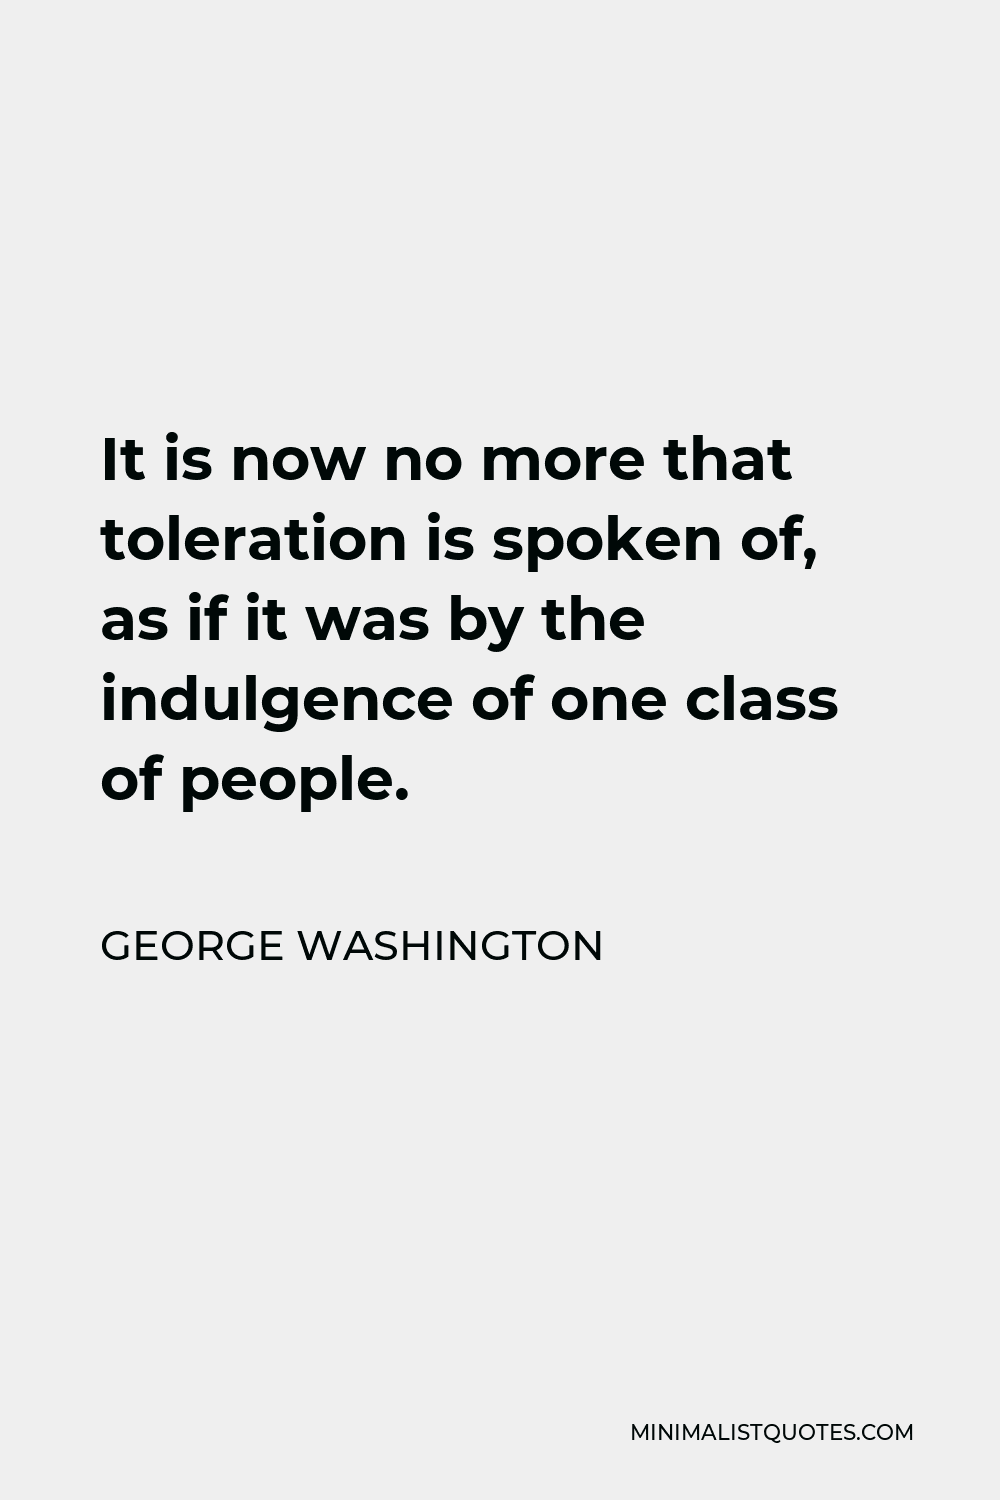 George Washington Quote - It is now no more that toleration is spoken of, as if it was by the indulgence of one class of people.